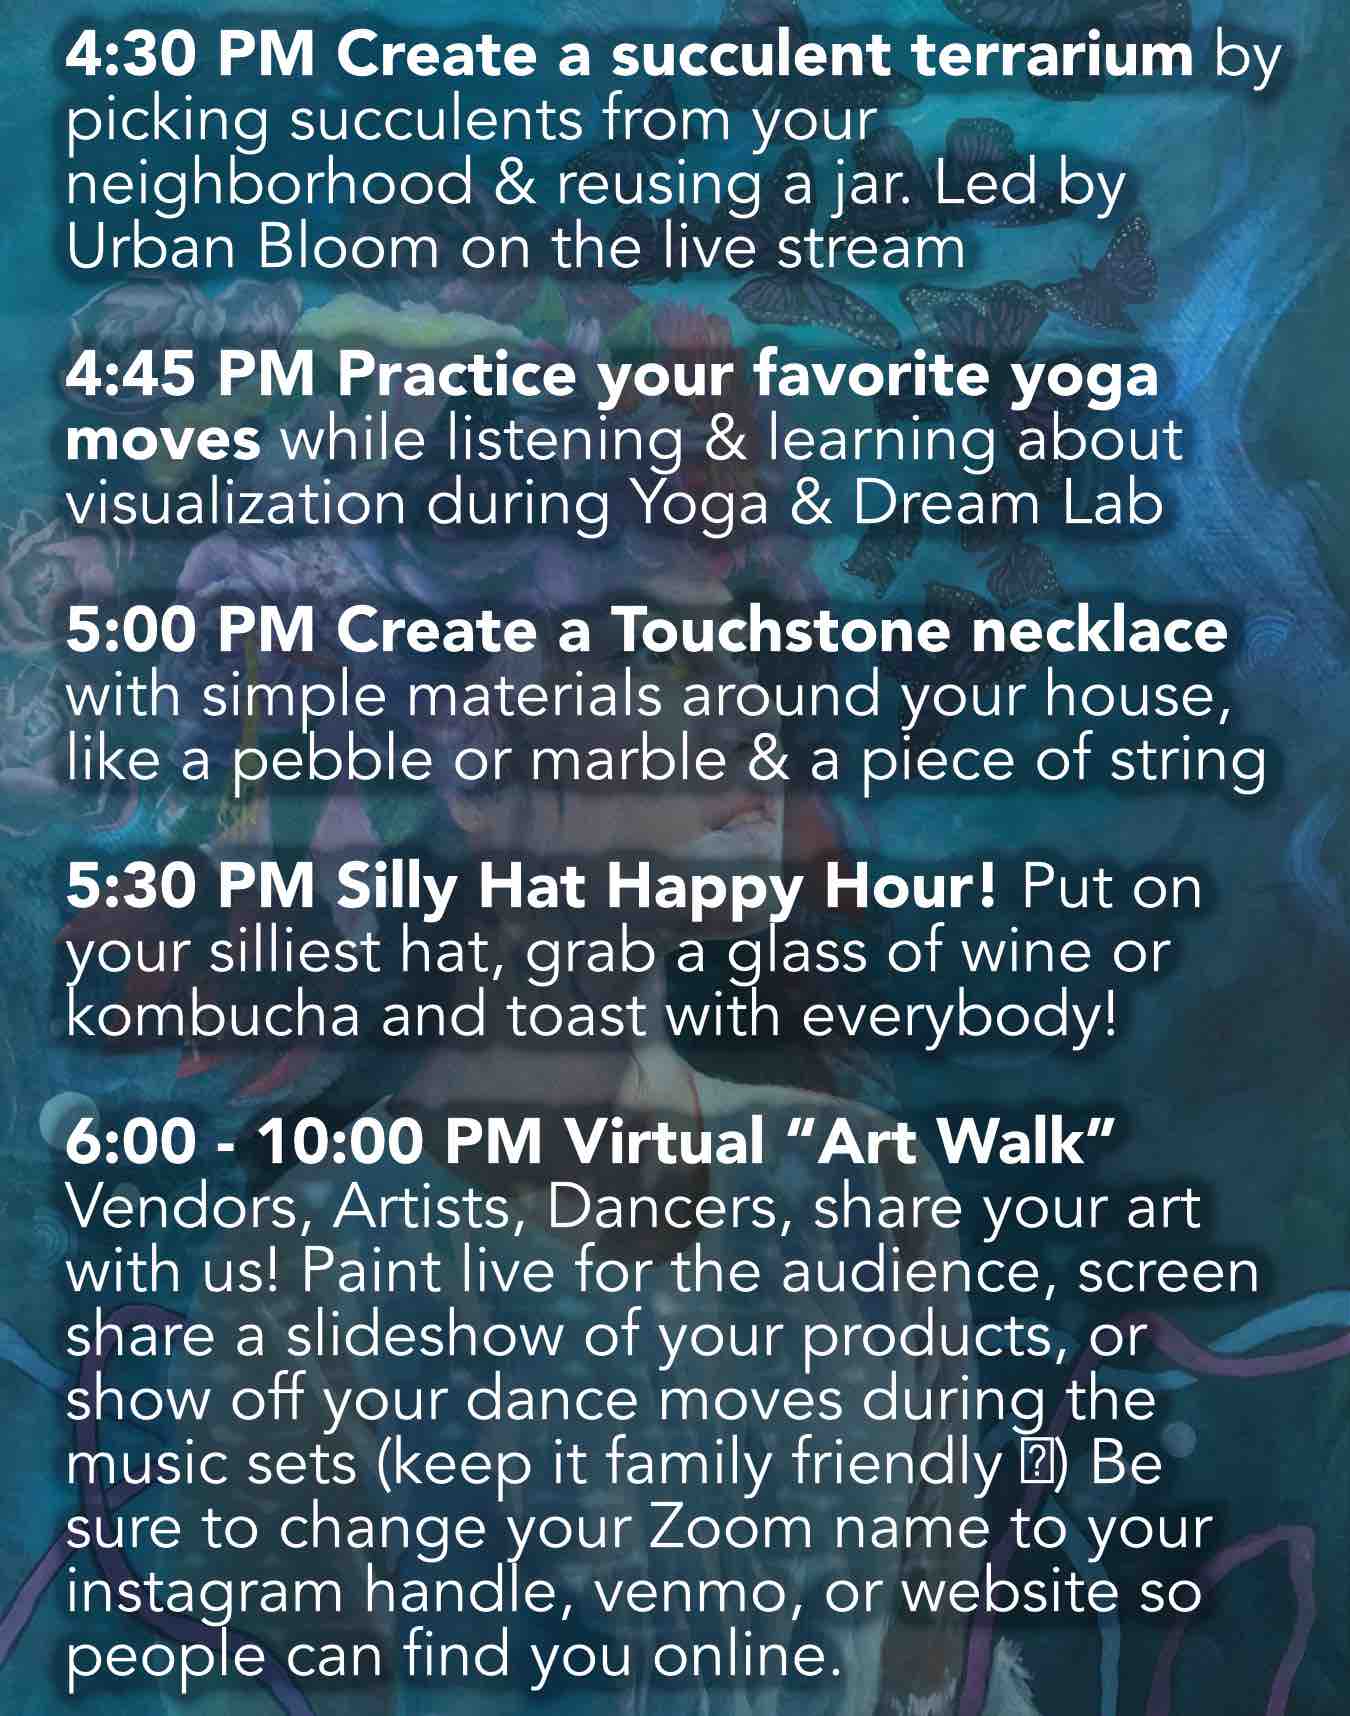 Reimagine music and arts festival Zoom instructions